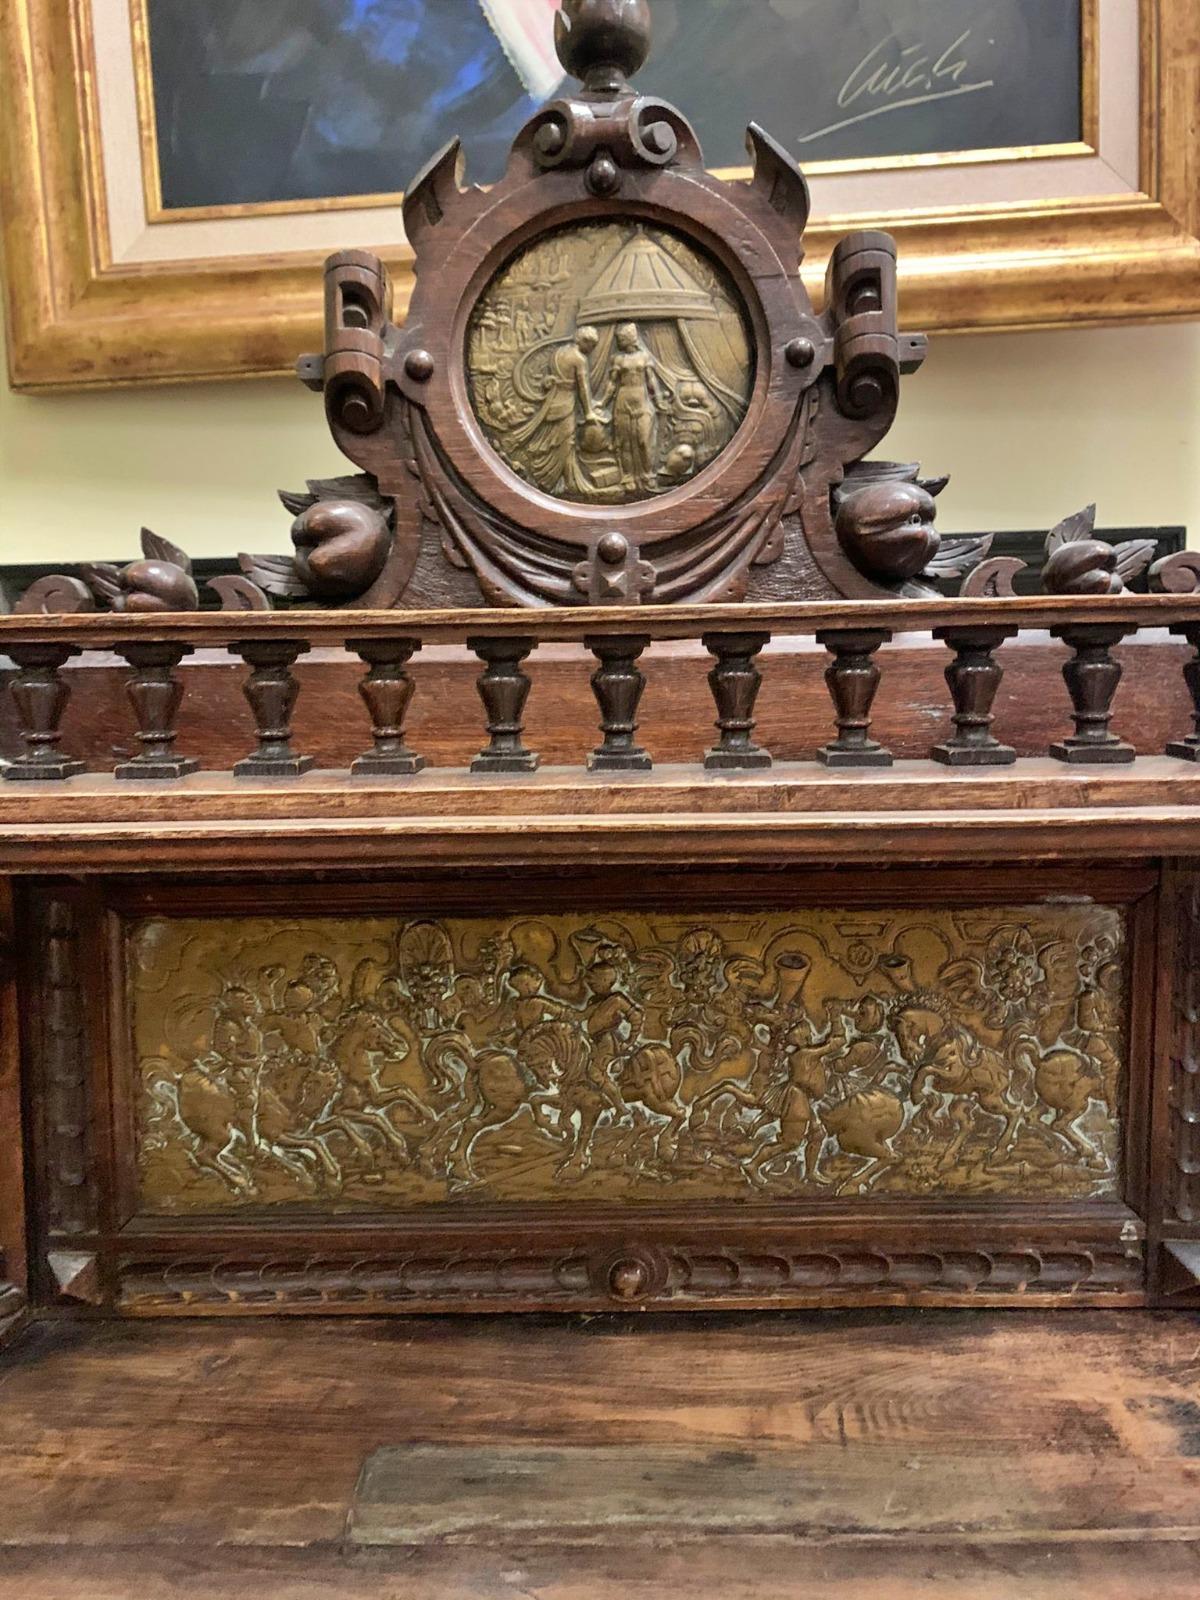 Title: Flemish Oak Wood Cabinet
Date/Period: XVIII century
Dimension: 158 x 49 x 84 cm
Materials: oak wood cabinet with embossed brass plates
Additional information: oak wood cabinet with embossed brass plates from the 17th century engravings of